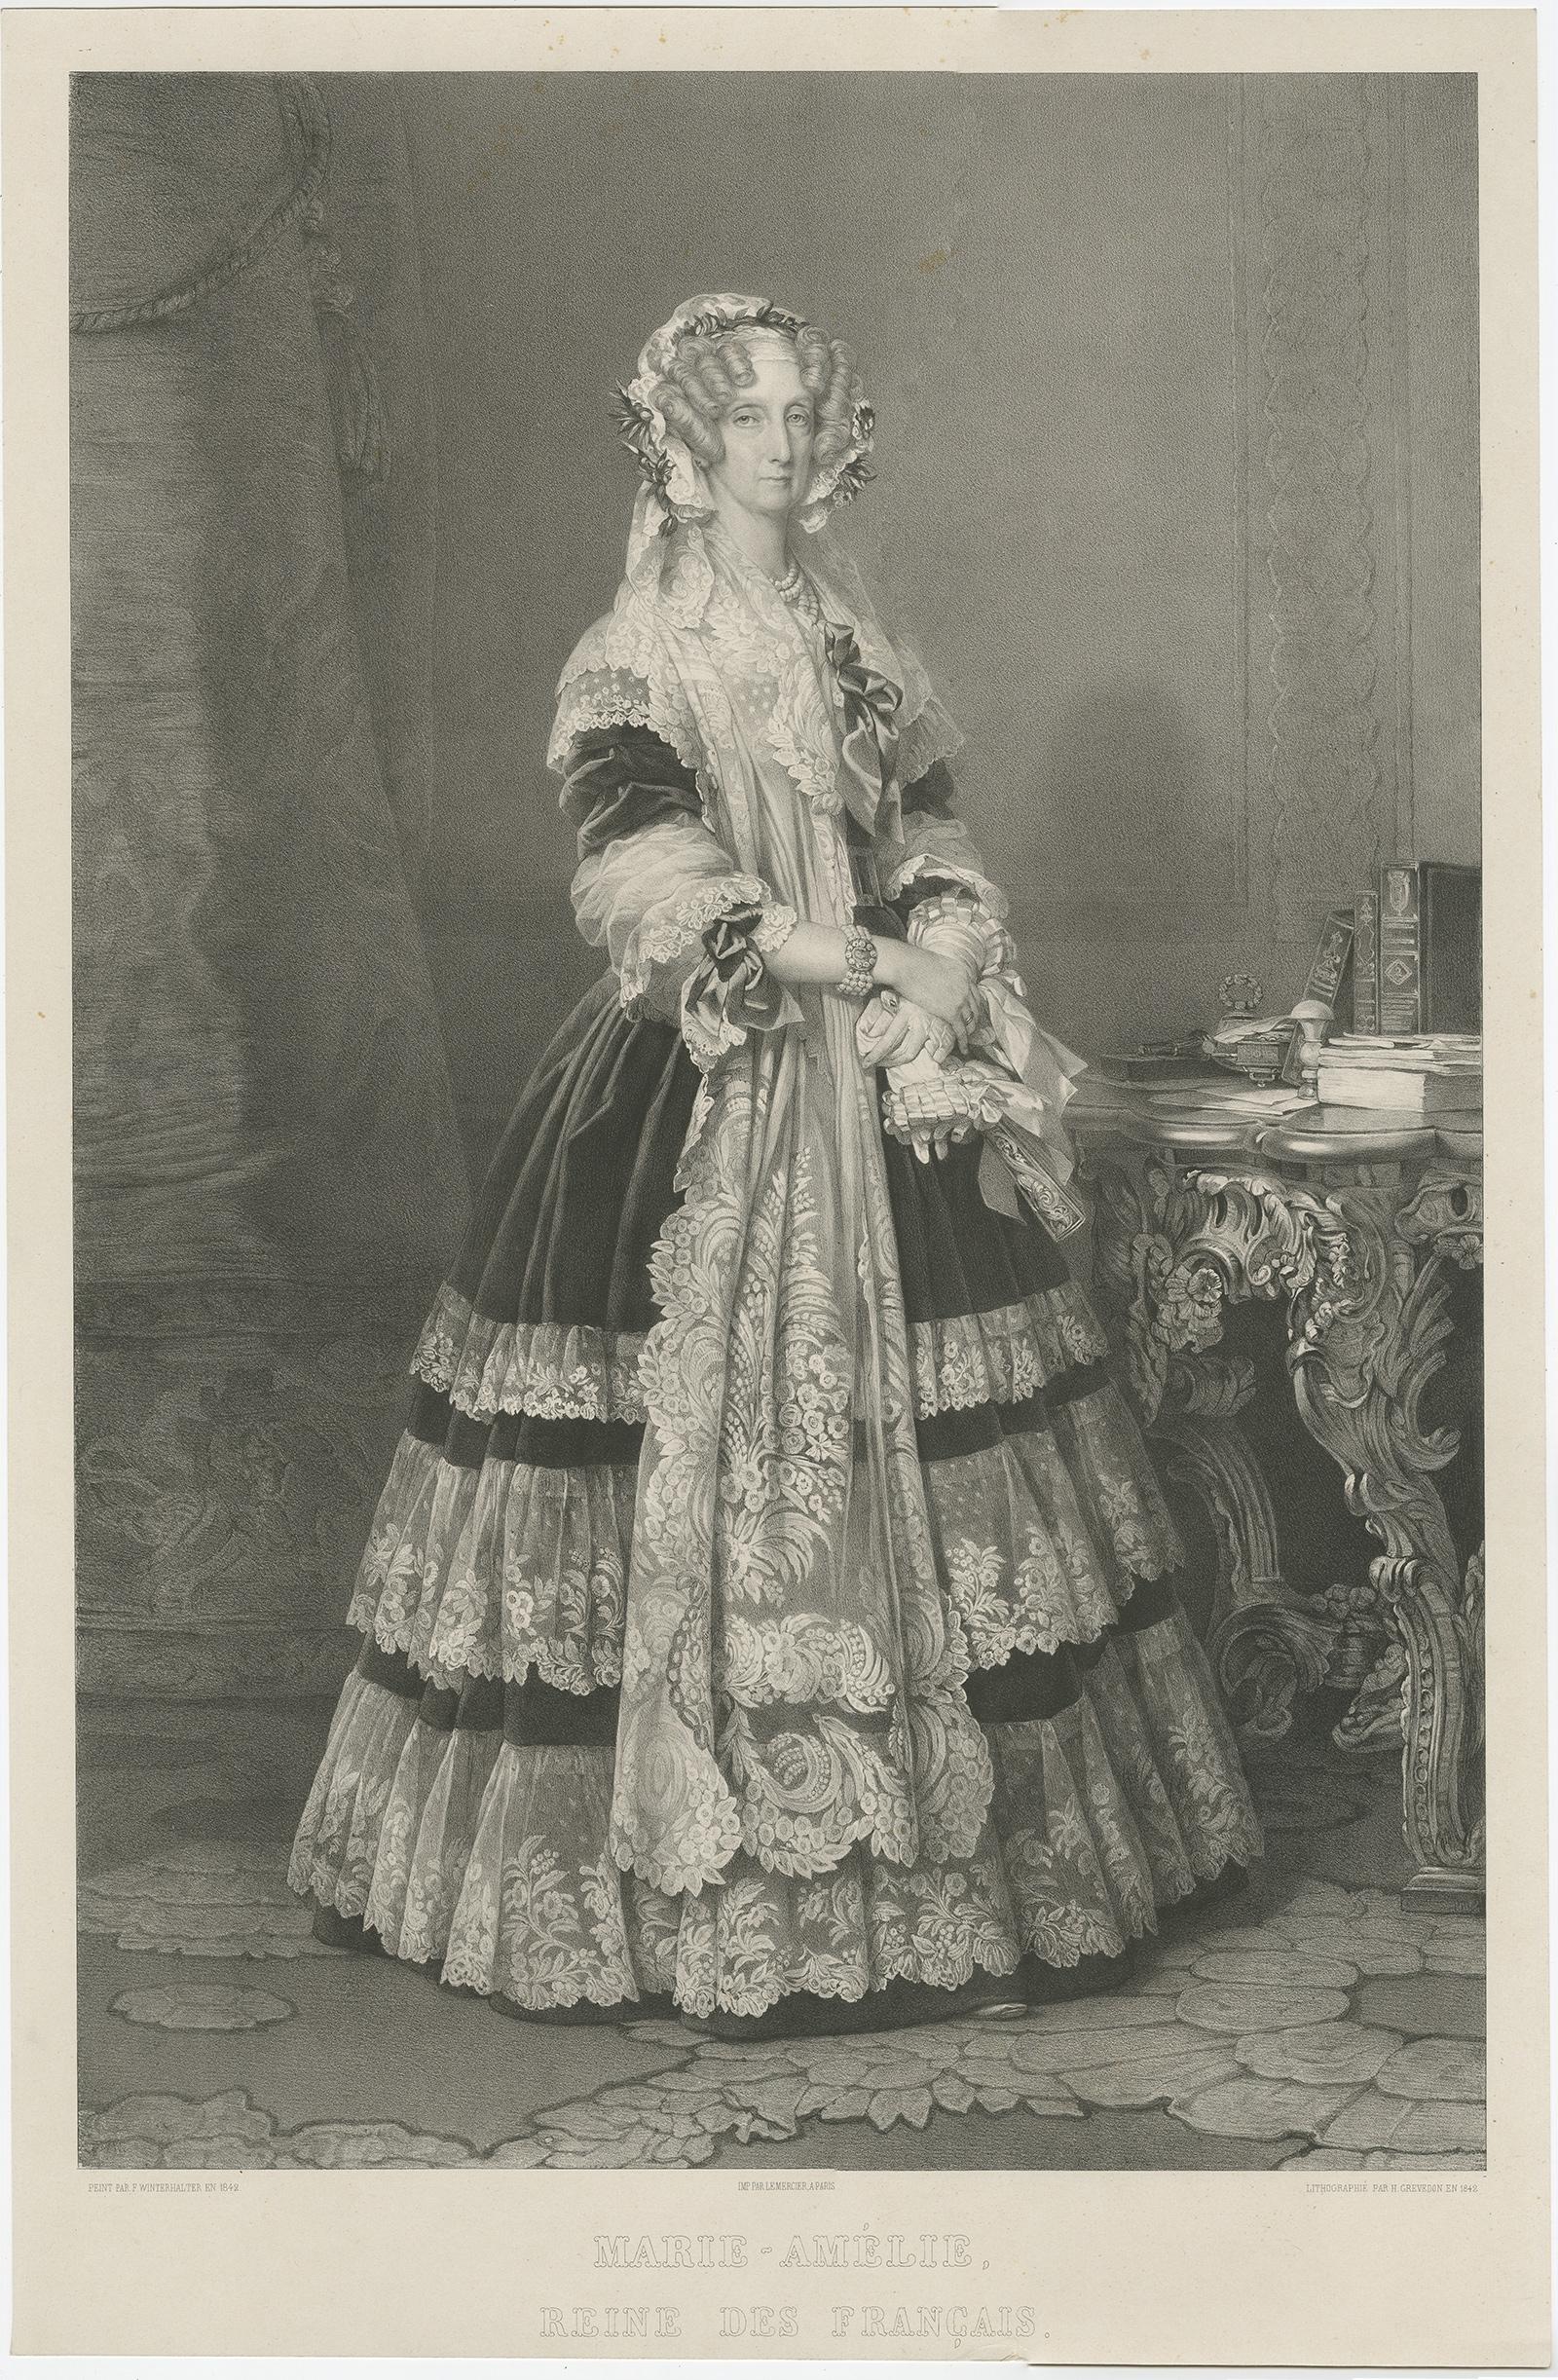 Antique print titled 'Marie-Amélie, Reine des Francais'. 

Large lithograph of Marie Amelia of Naples and Sicily, Queen of the French. Whole length with hair in ringlets, lace bonnet, gown, and lace veil. The Queen is pictured standing beside a